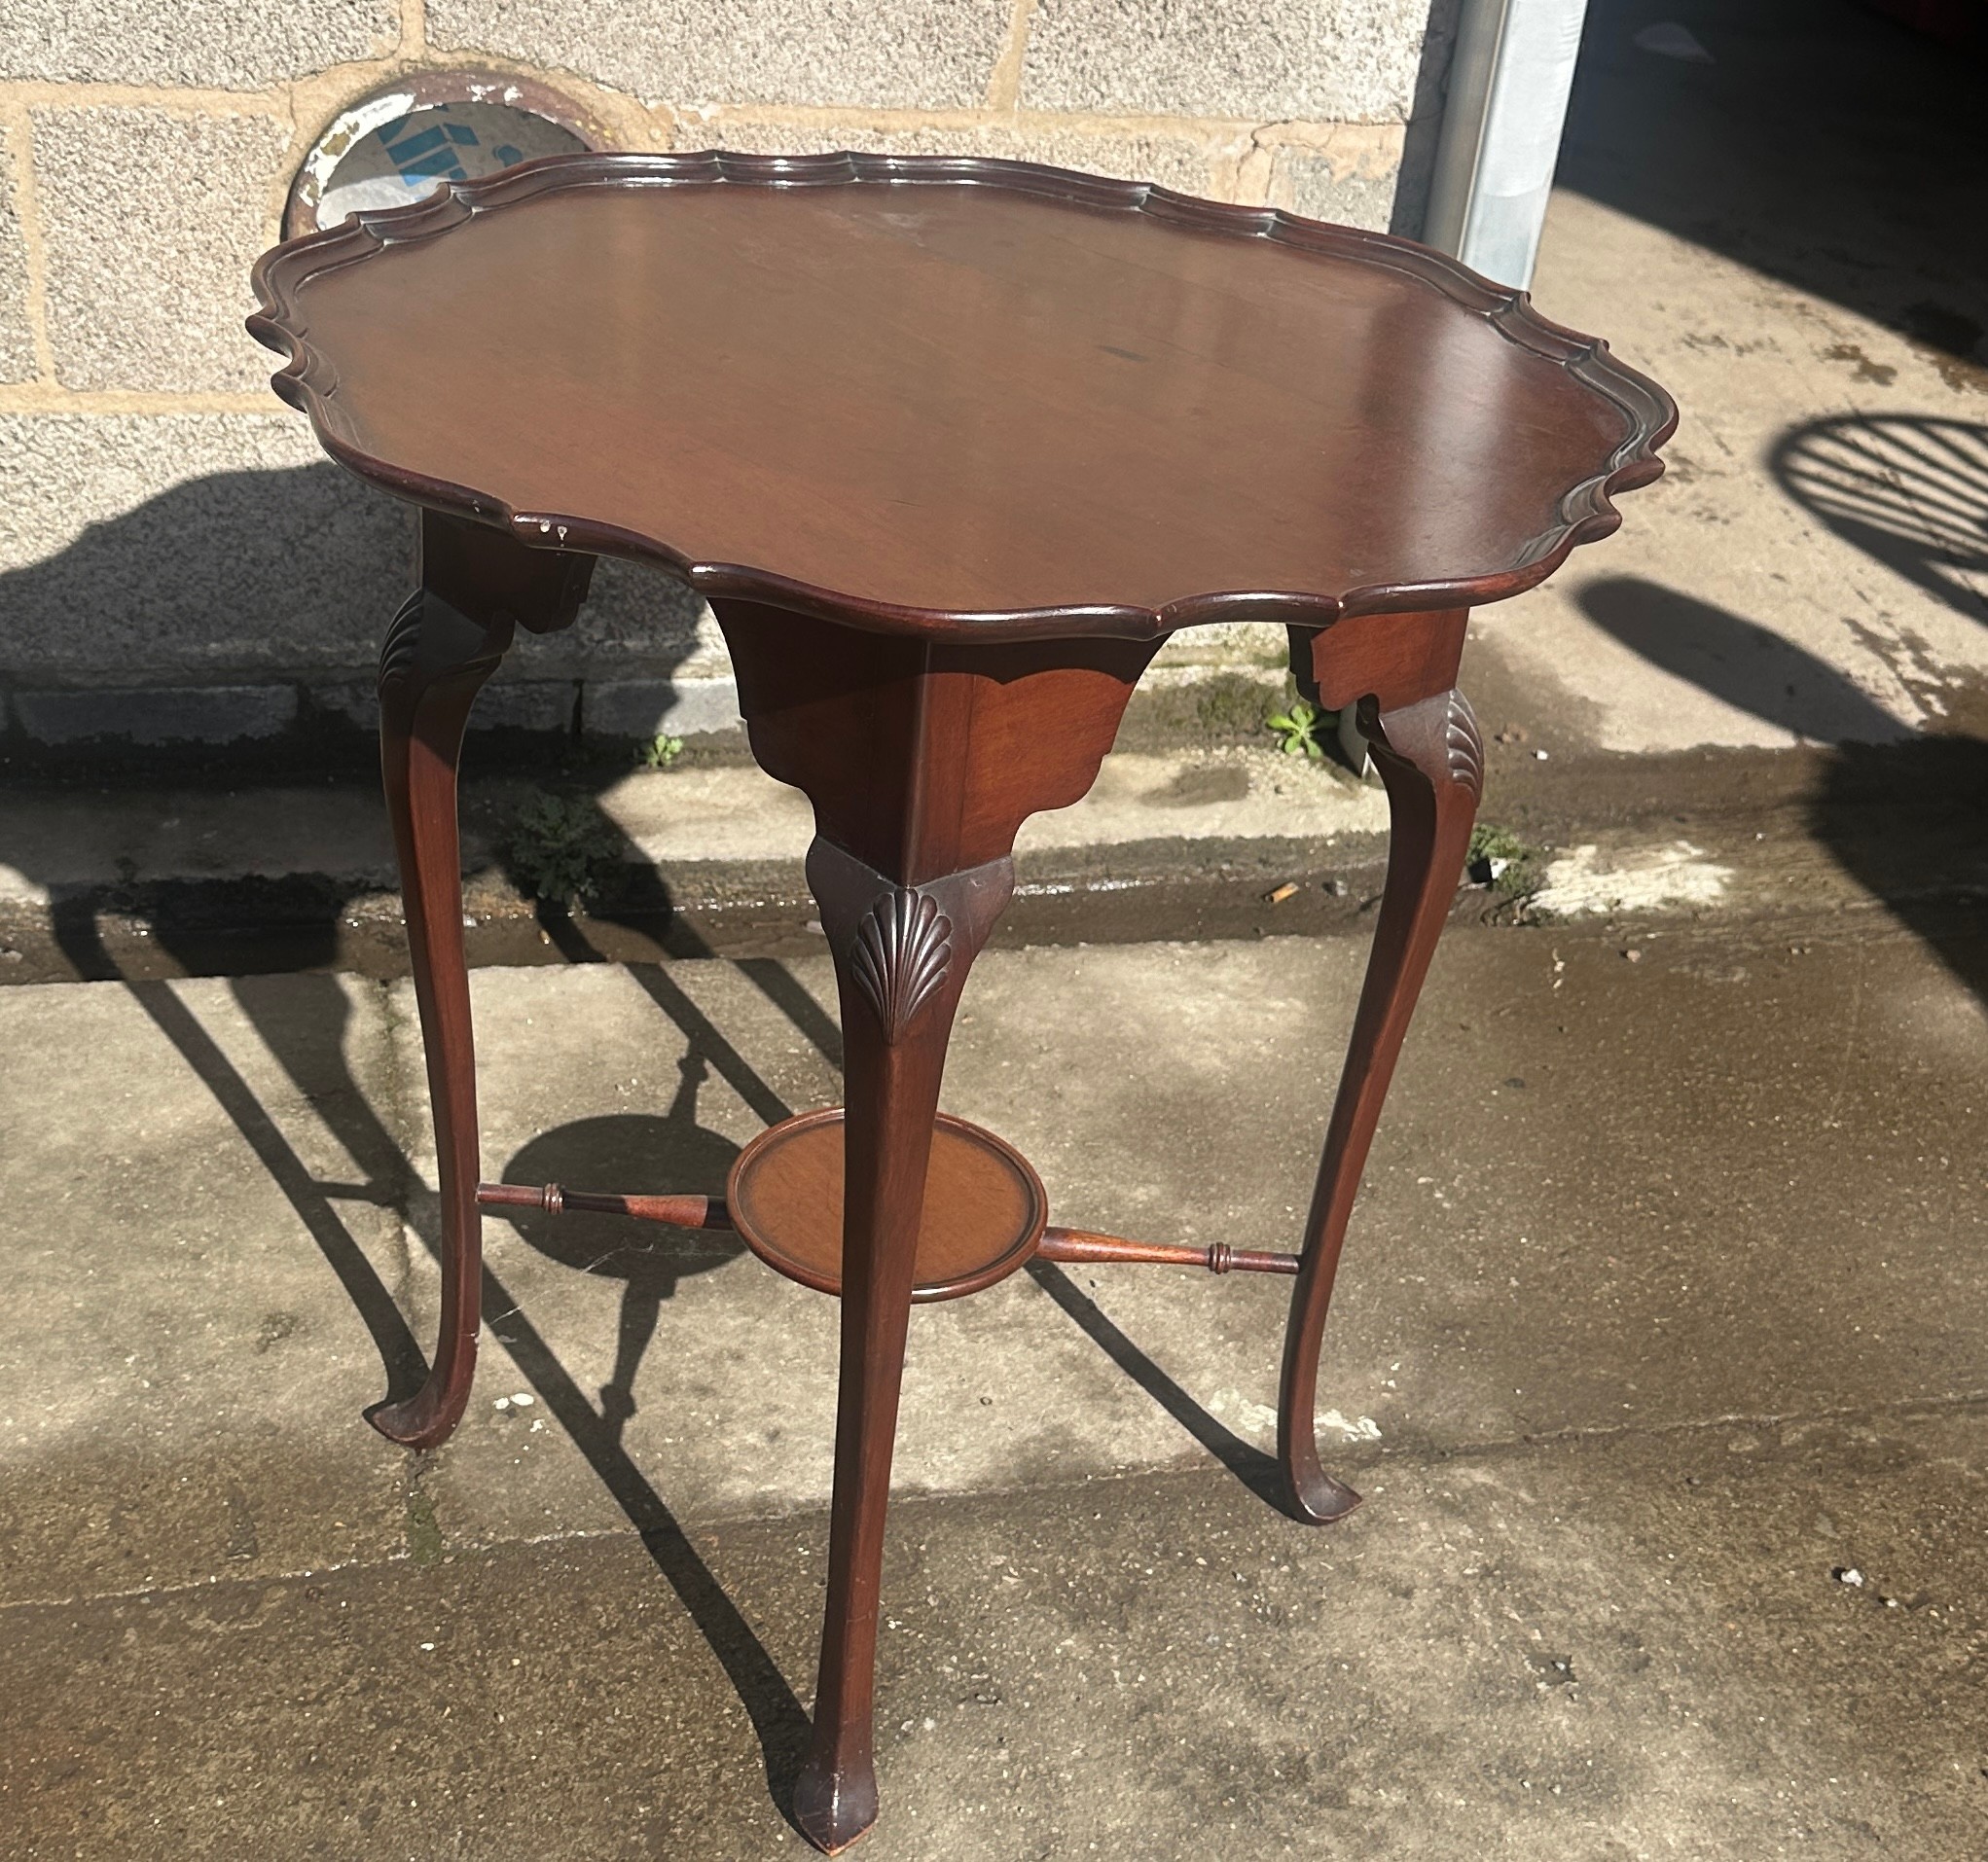 Mahogany occasional table measures approx 27 inches tall by 25 diameter - Image 4 of 4